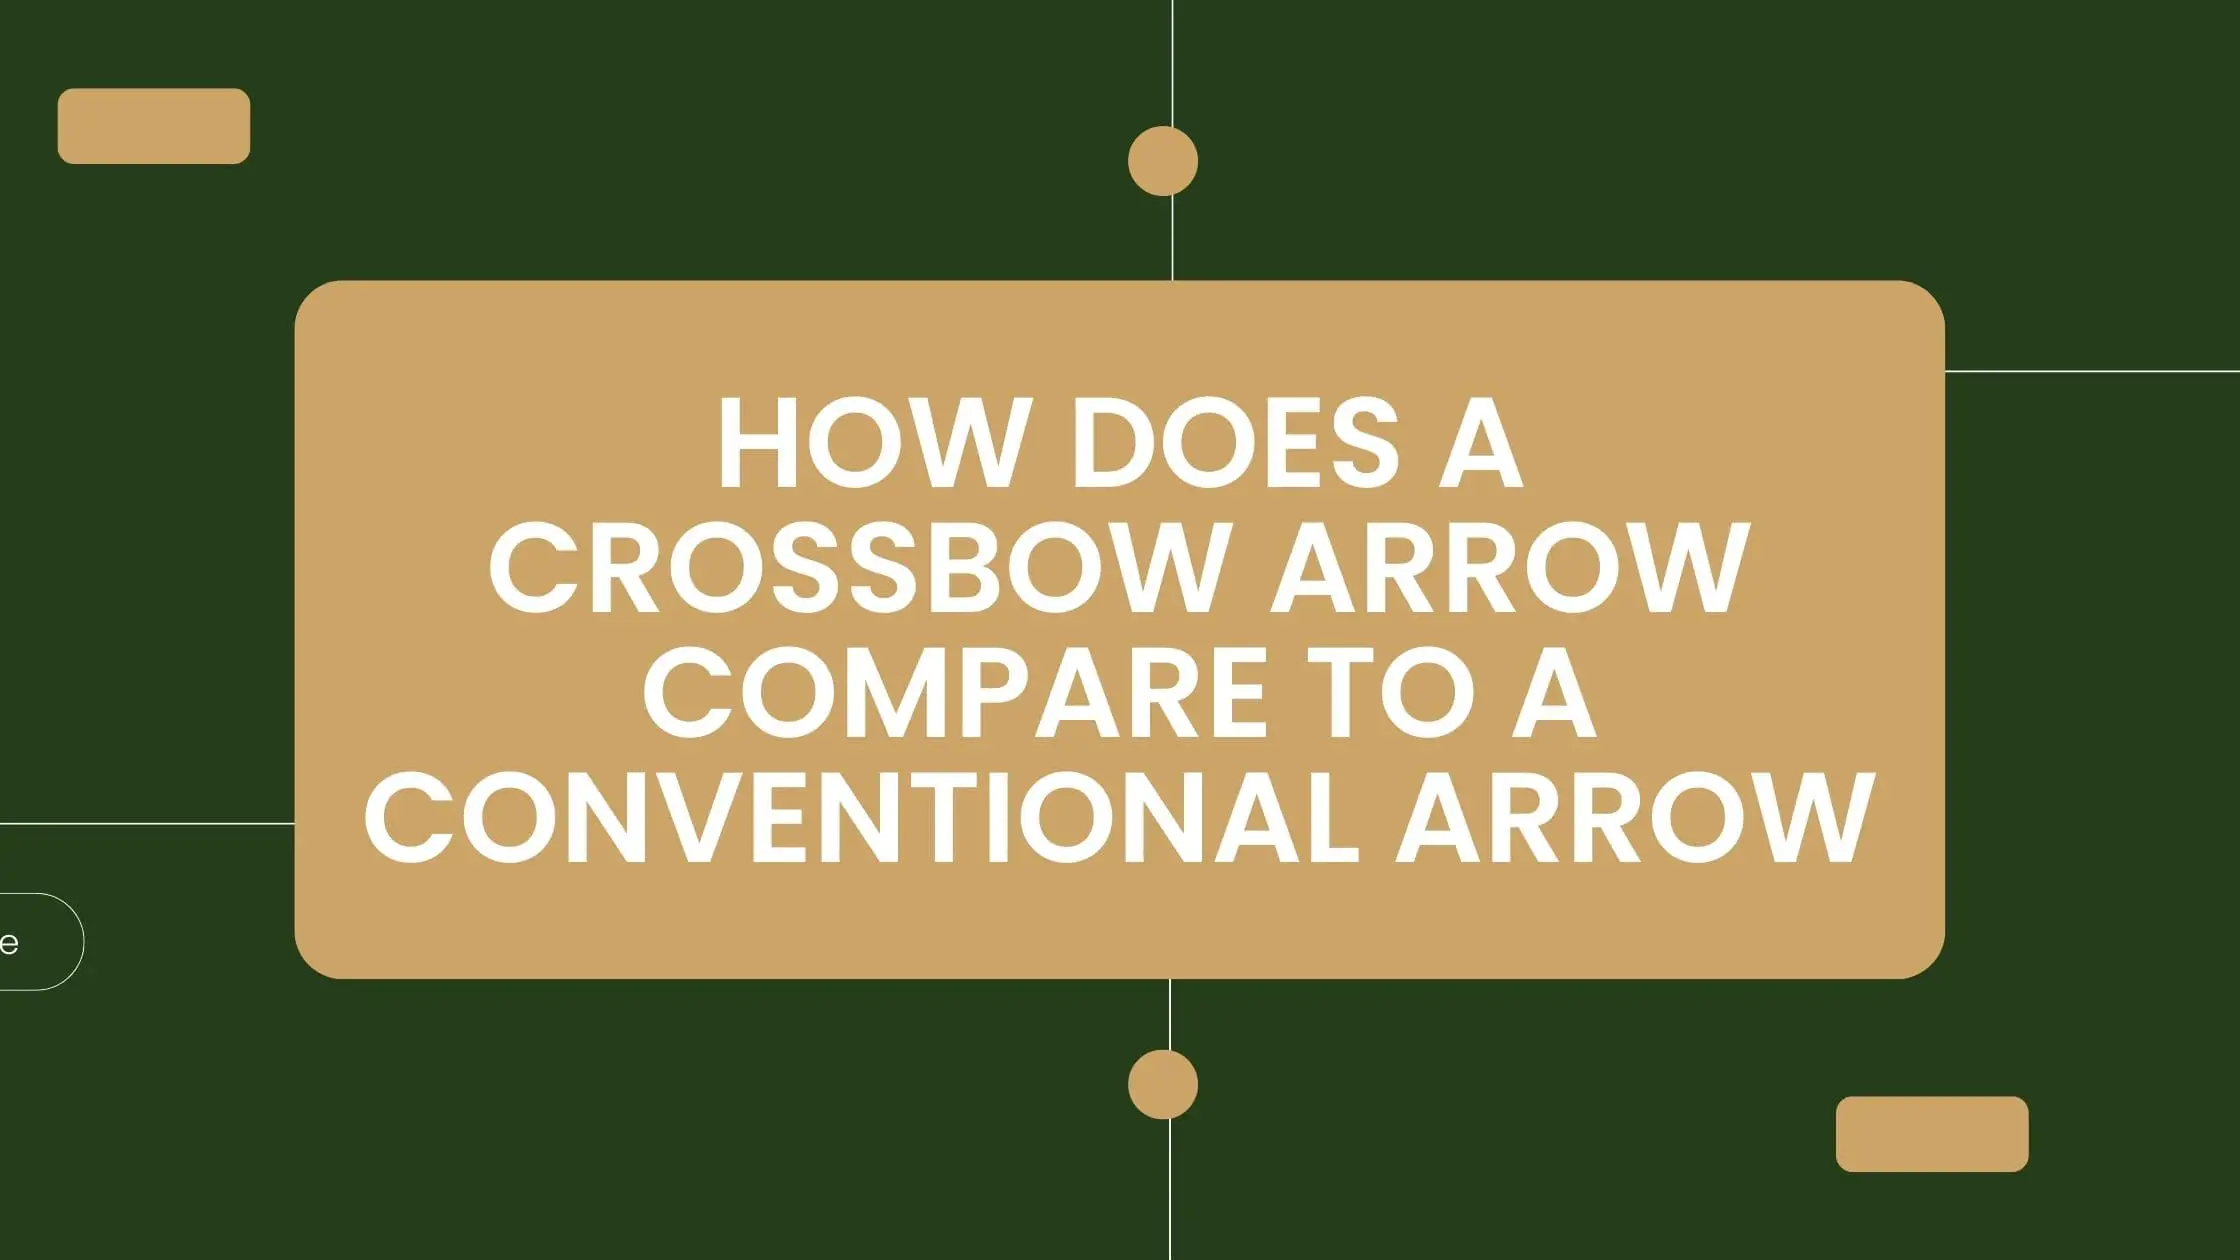 How Does a Crossbow Arrow Compare to a Conventional Arrow